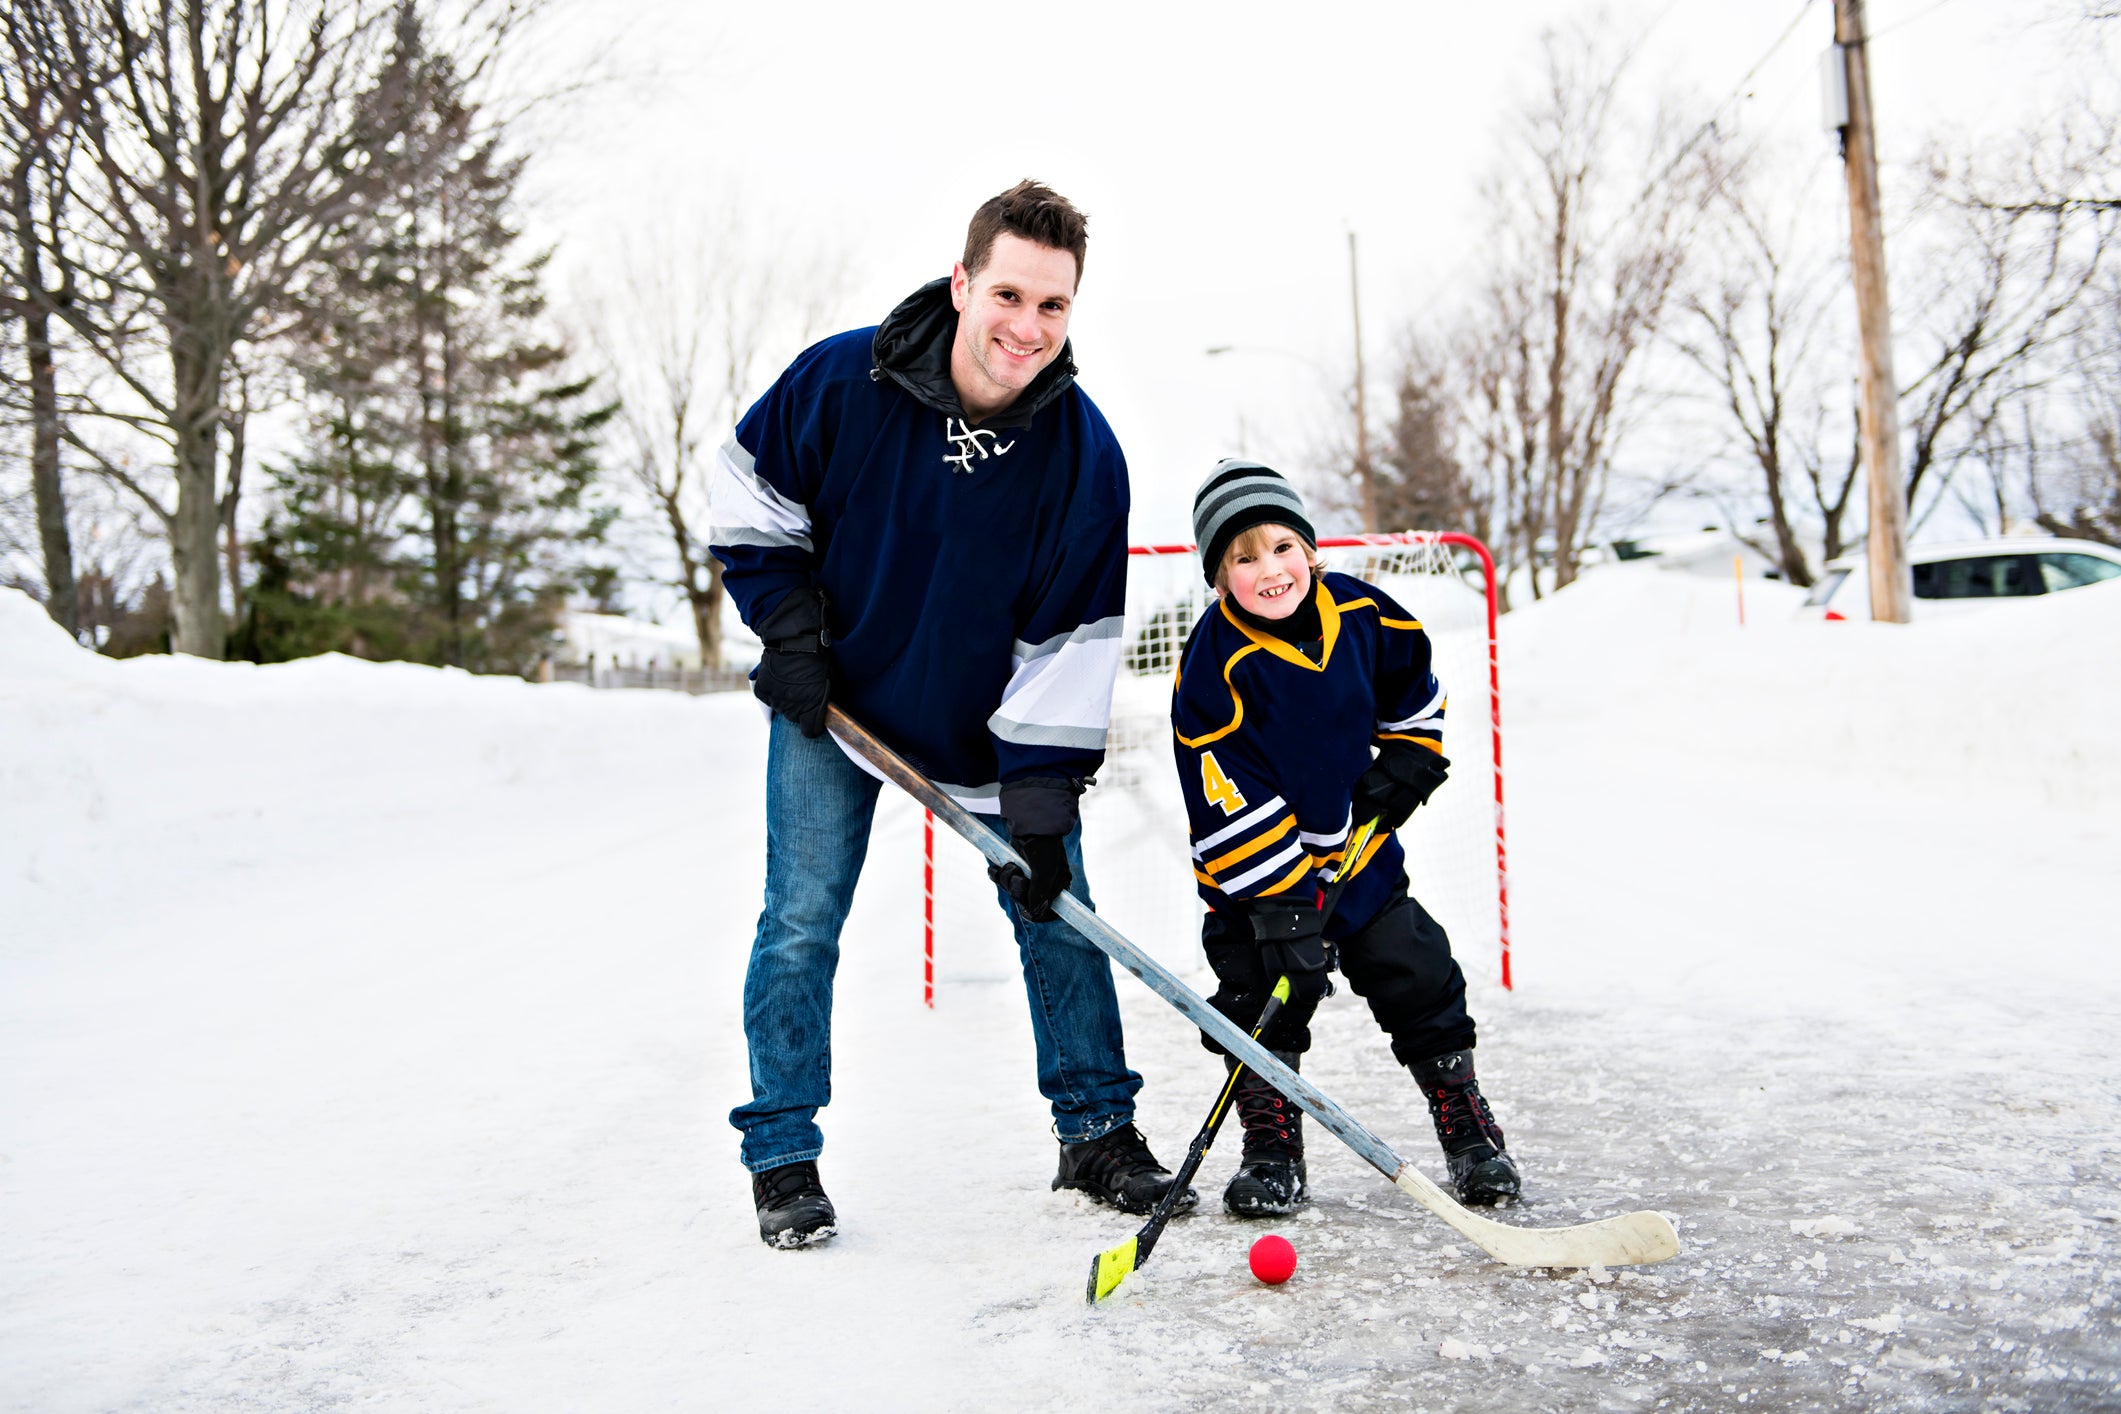 5 FATHER'S DAY GIFTS FOR HOCKEY DADS